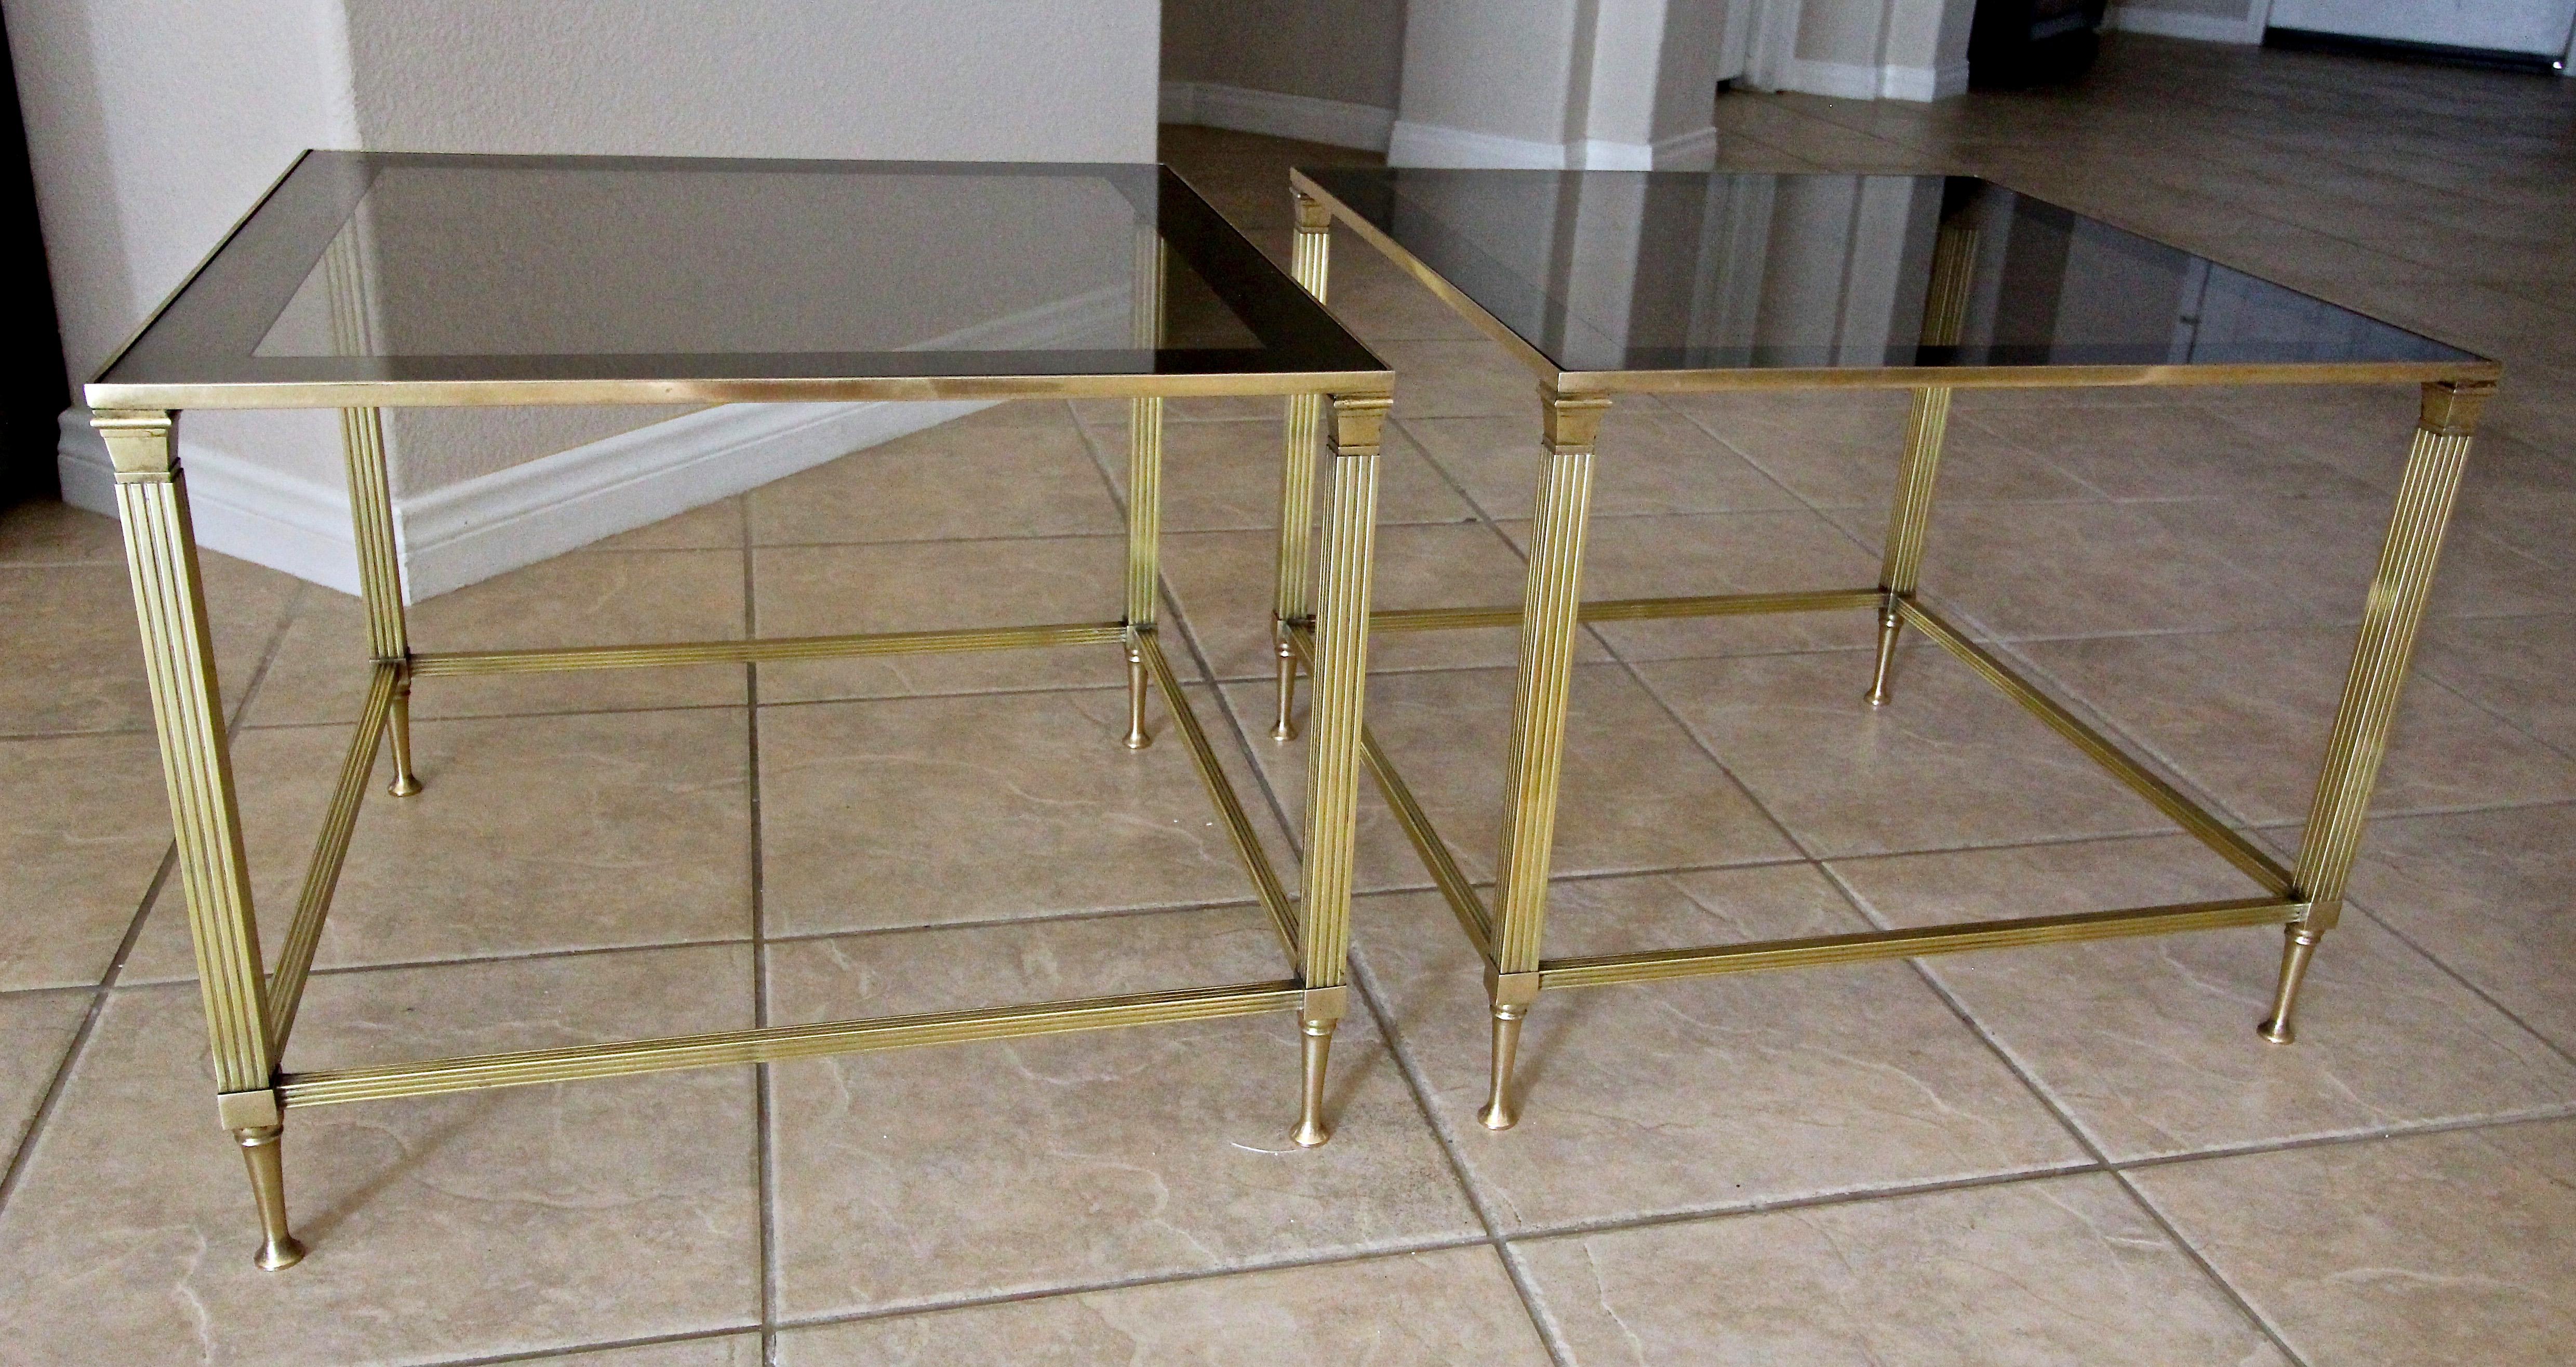 A pair of French brass side tables with smoked mirrored edge glass inset tops, by well known maker Maison Jansen.